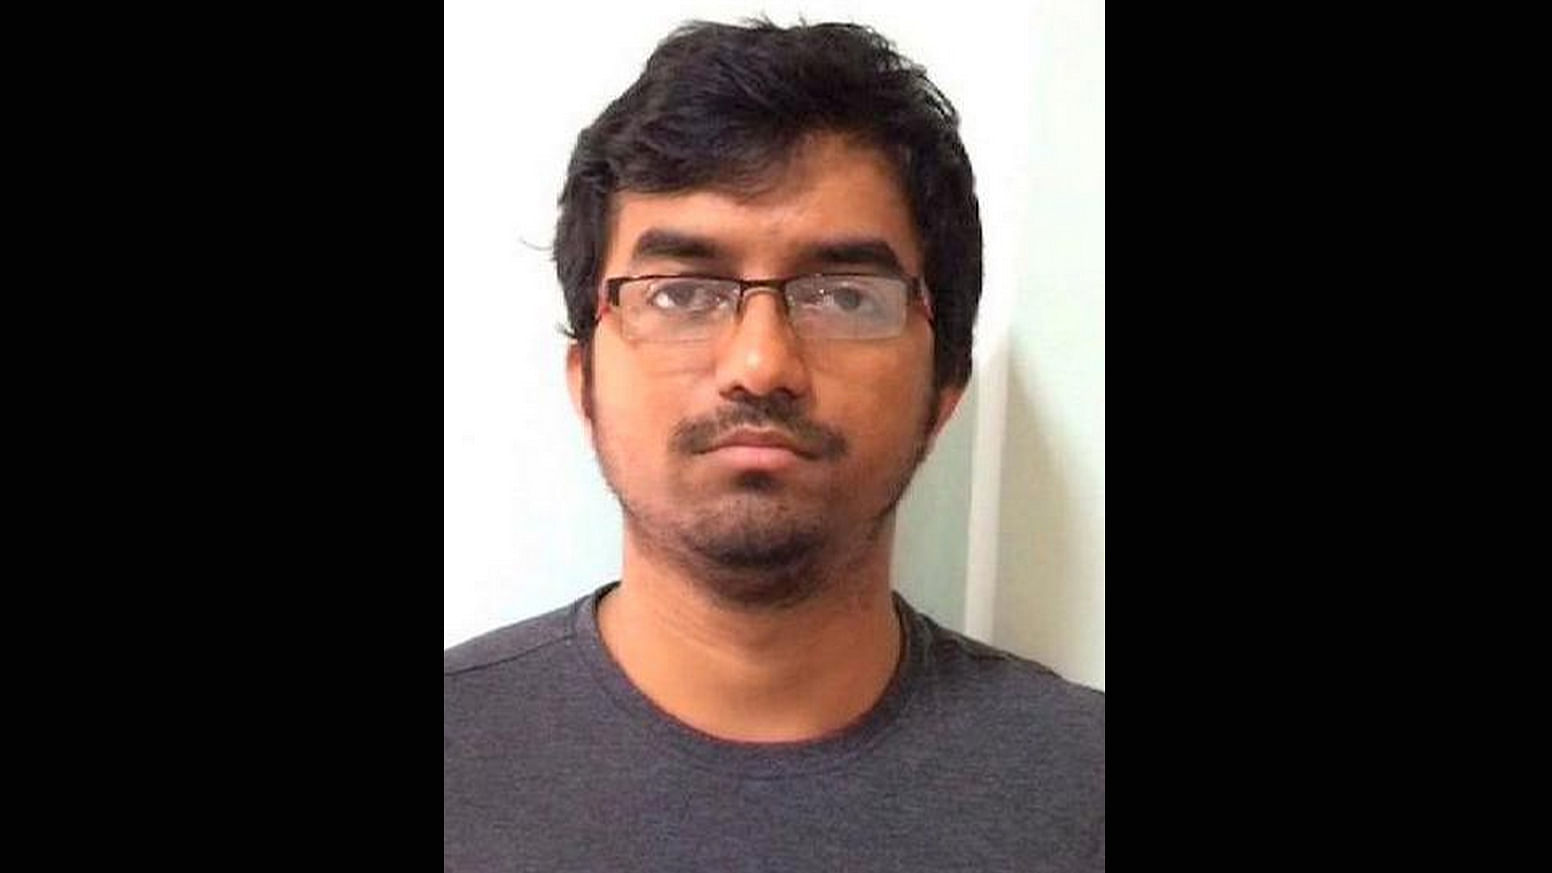 (Photo Courtesy: <i><a href="http://www.thenewsminute.com/article/bengaluru-police-file-37000-page-charge-sheet-against-mehdi-masroor-biswas">The News Minute</a></i>)